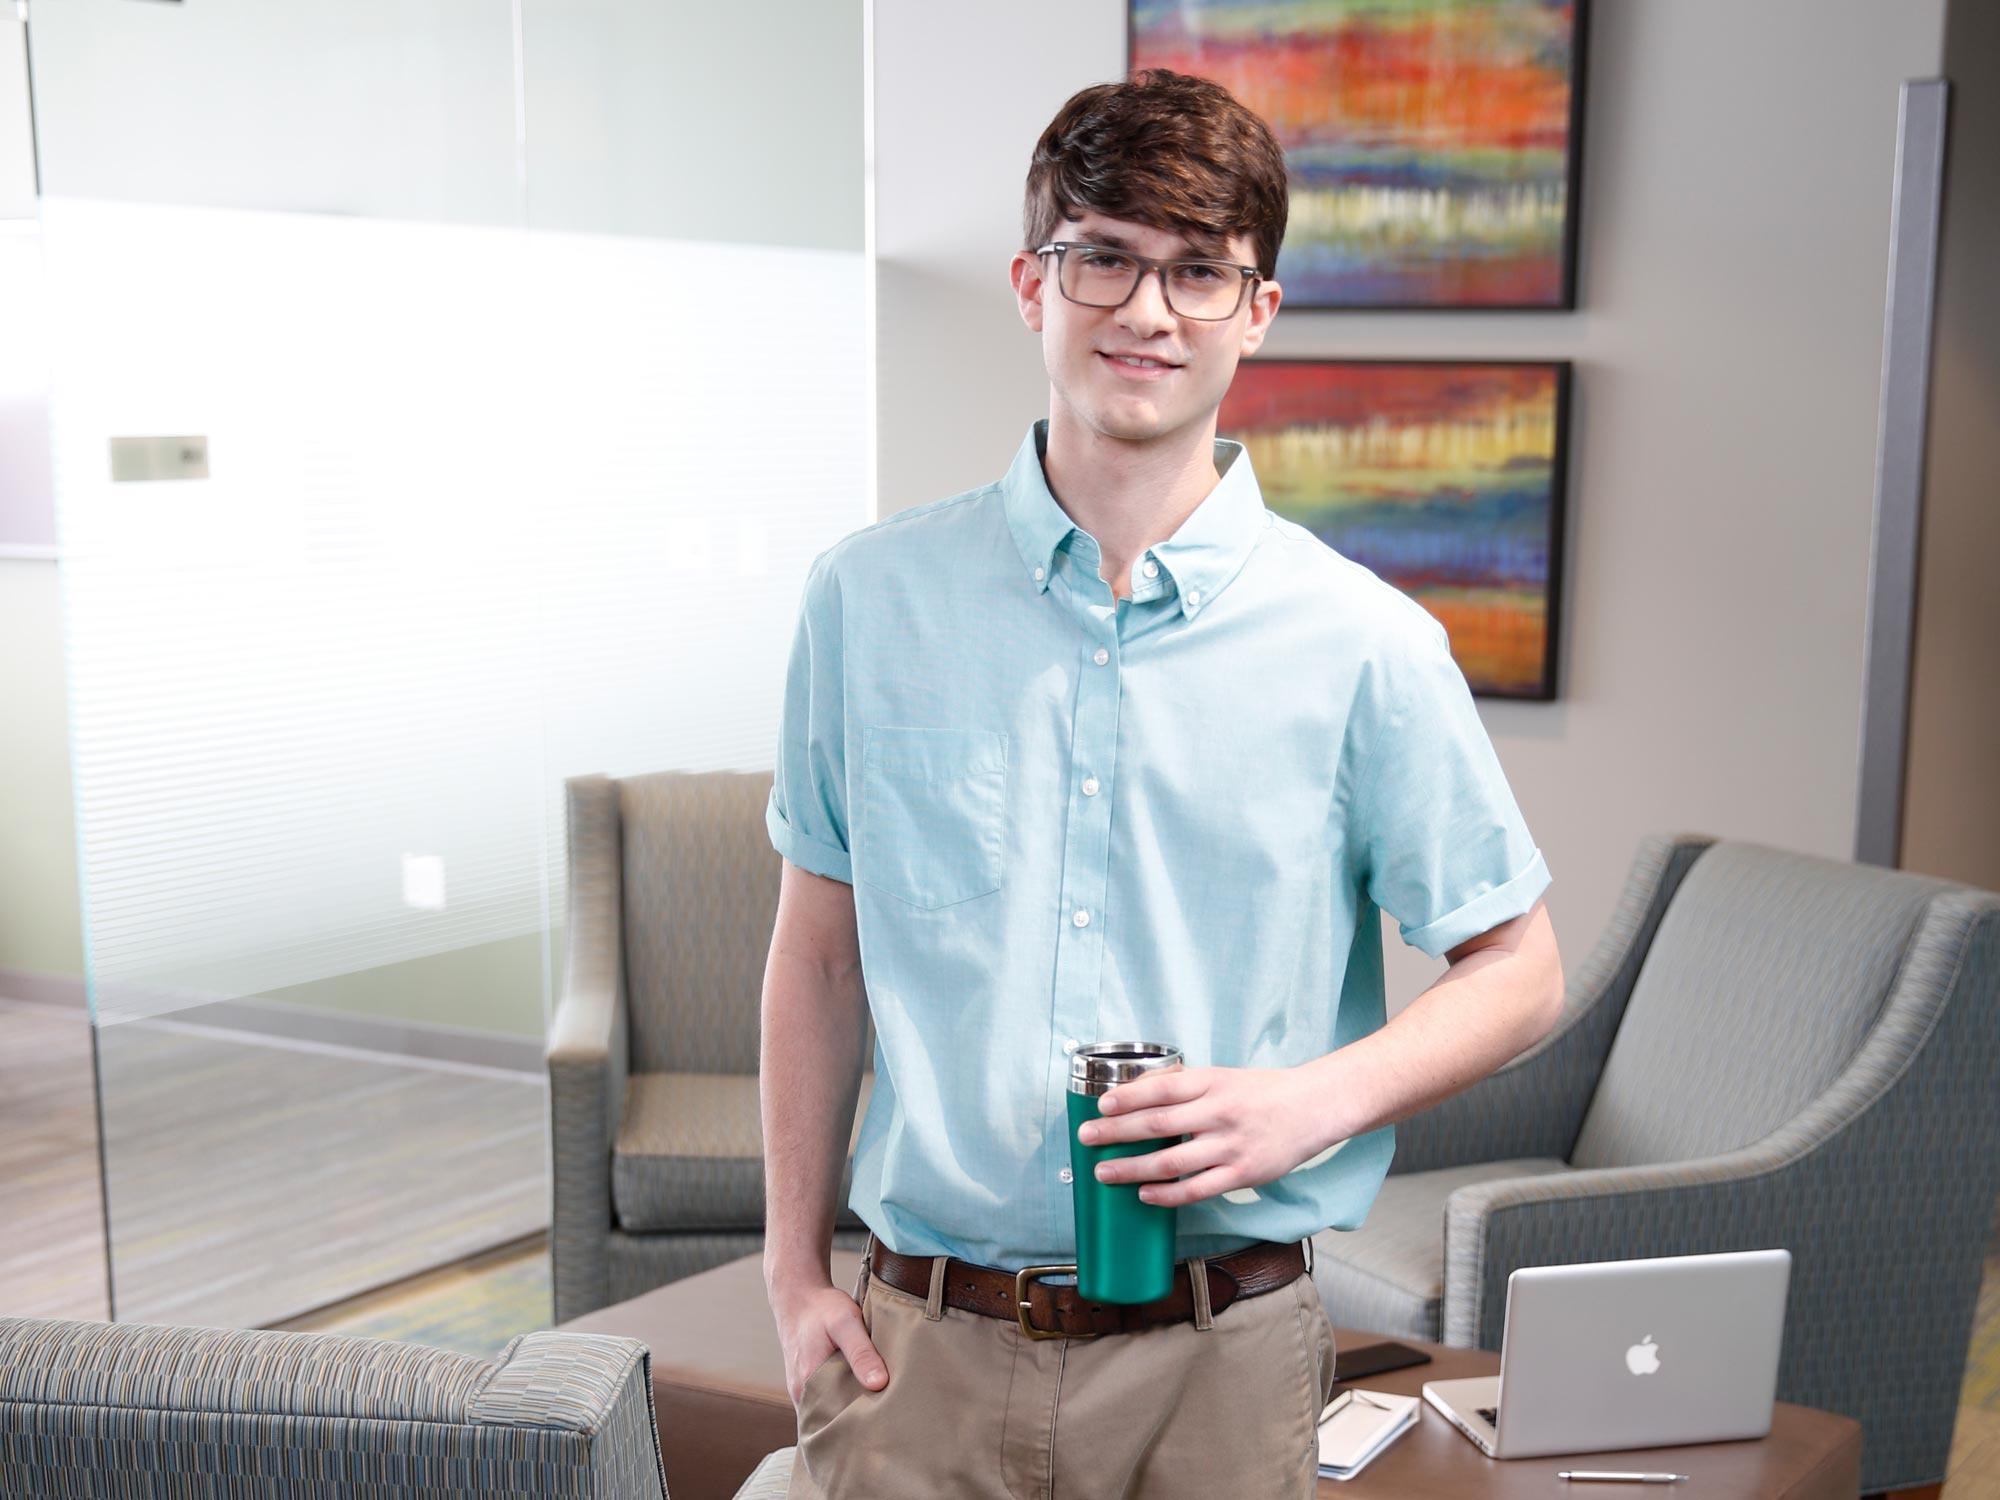 Male student with glasses and coffee mug